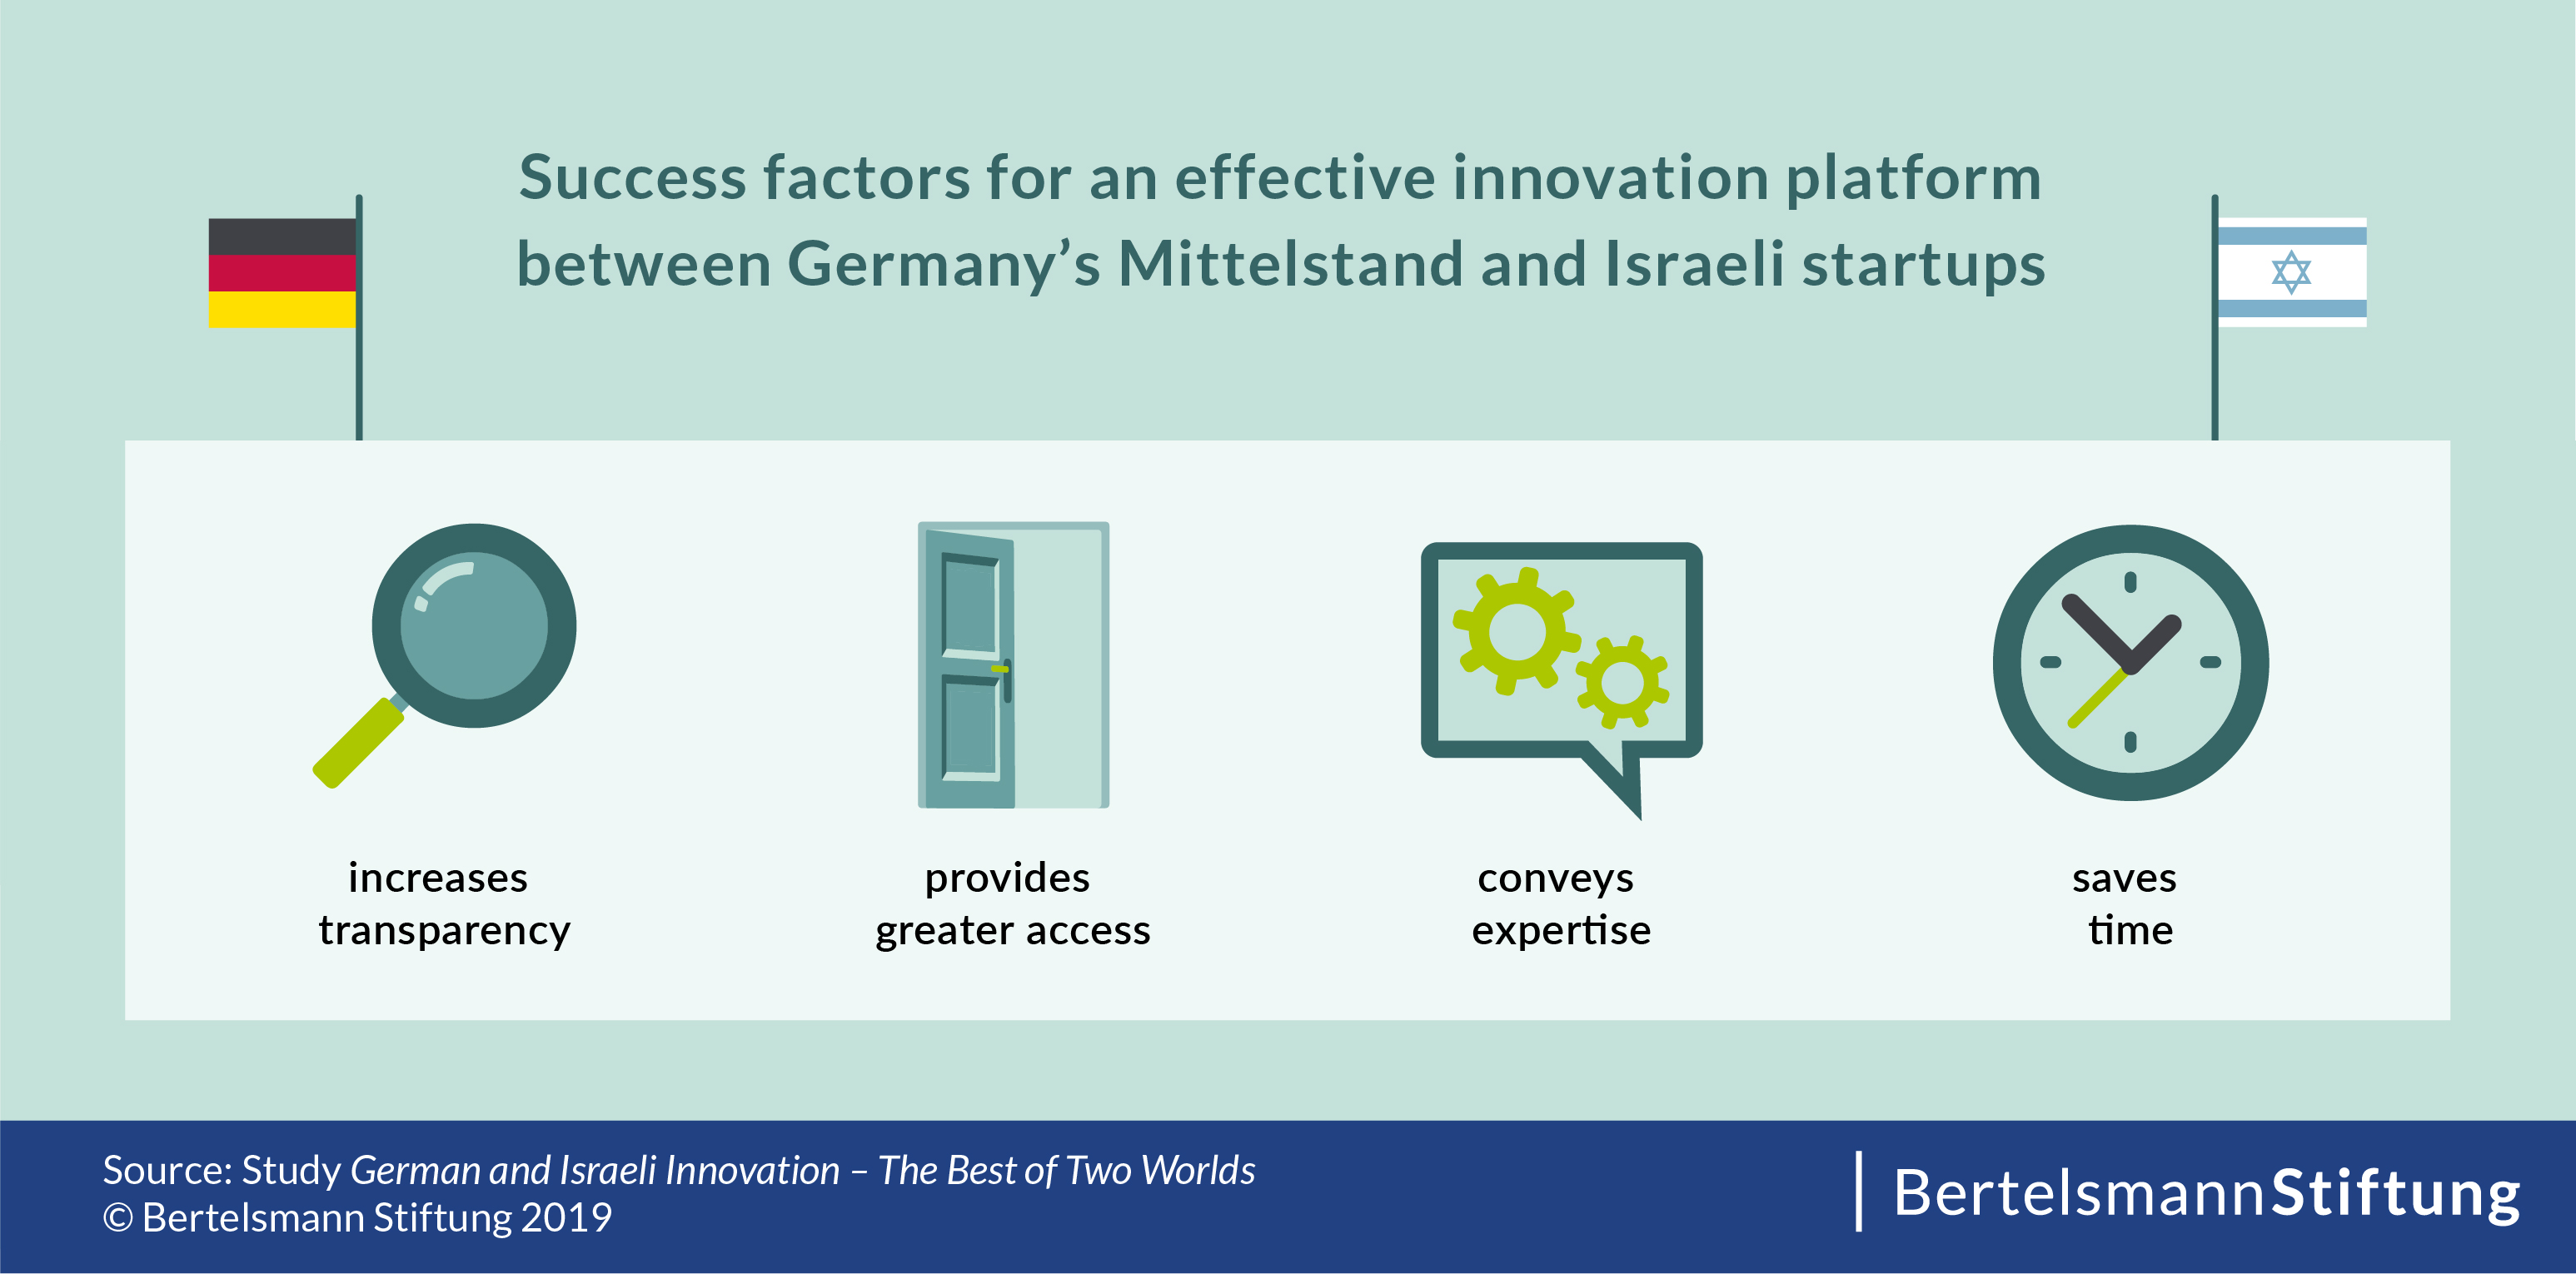 Connecting Germany's Mittelstand and Israeli startups - success factors